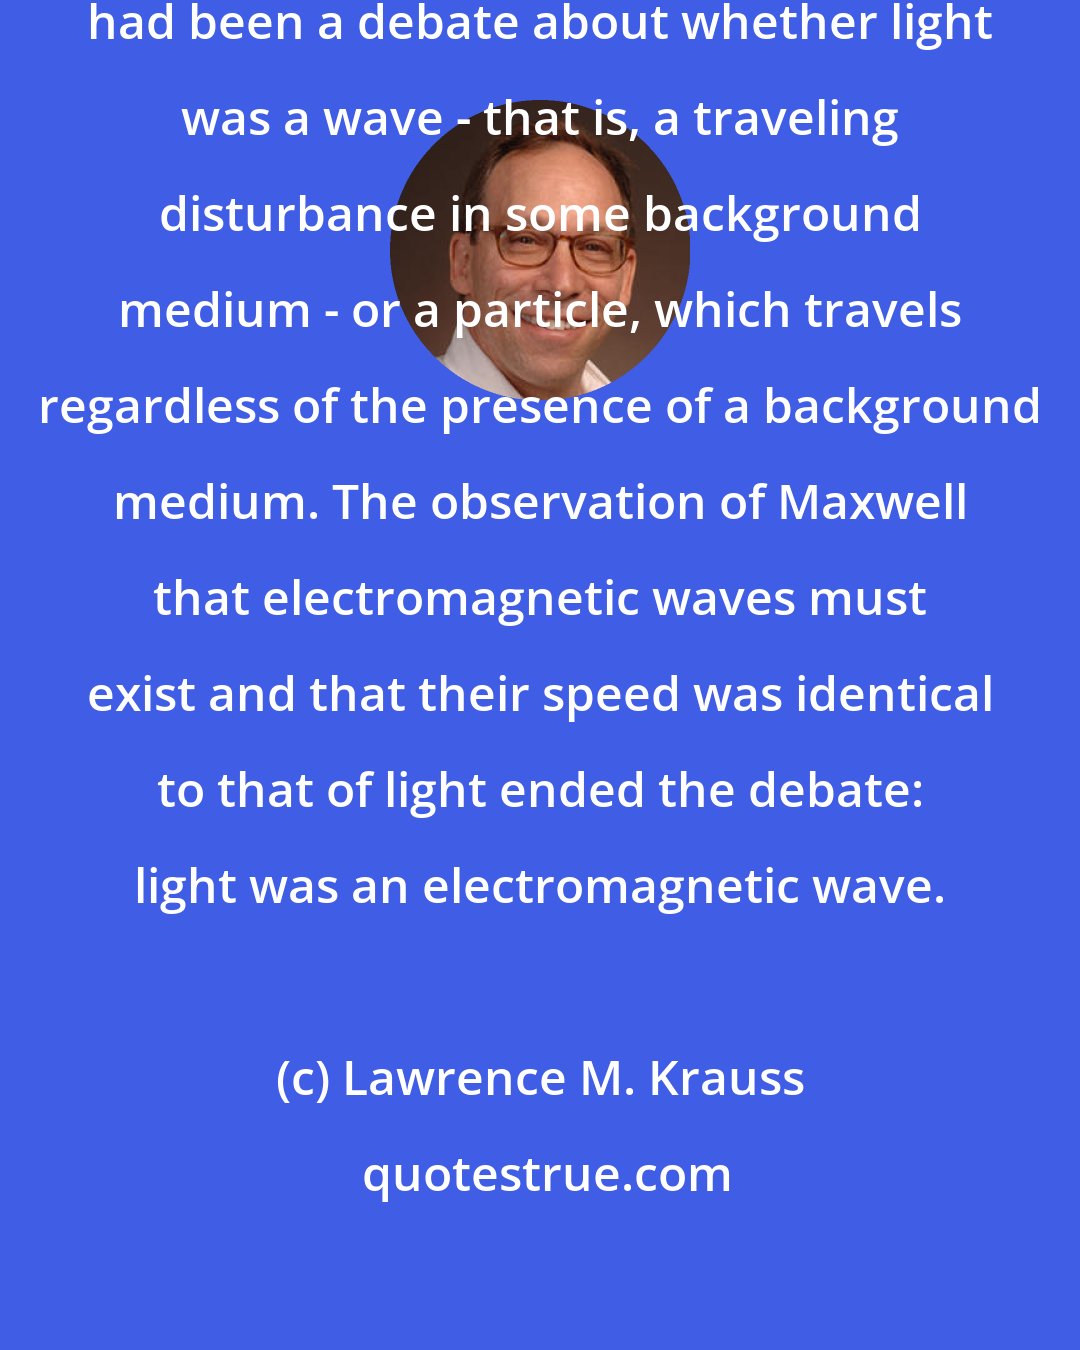 Lawrence M. Krauss: Now, since the time of Newton there had been a debate about whether light was a wave - that is, a traveling disturbance in some background medium - or a particle, which travels regardless of the presence of a background medium. The observation of Maxwell that electromagnetic waves must exist and that their speed was identical to that of light ended the debate: light was an electromagnetic wave.